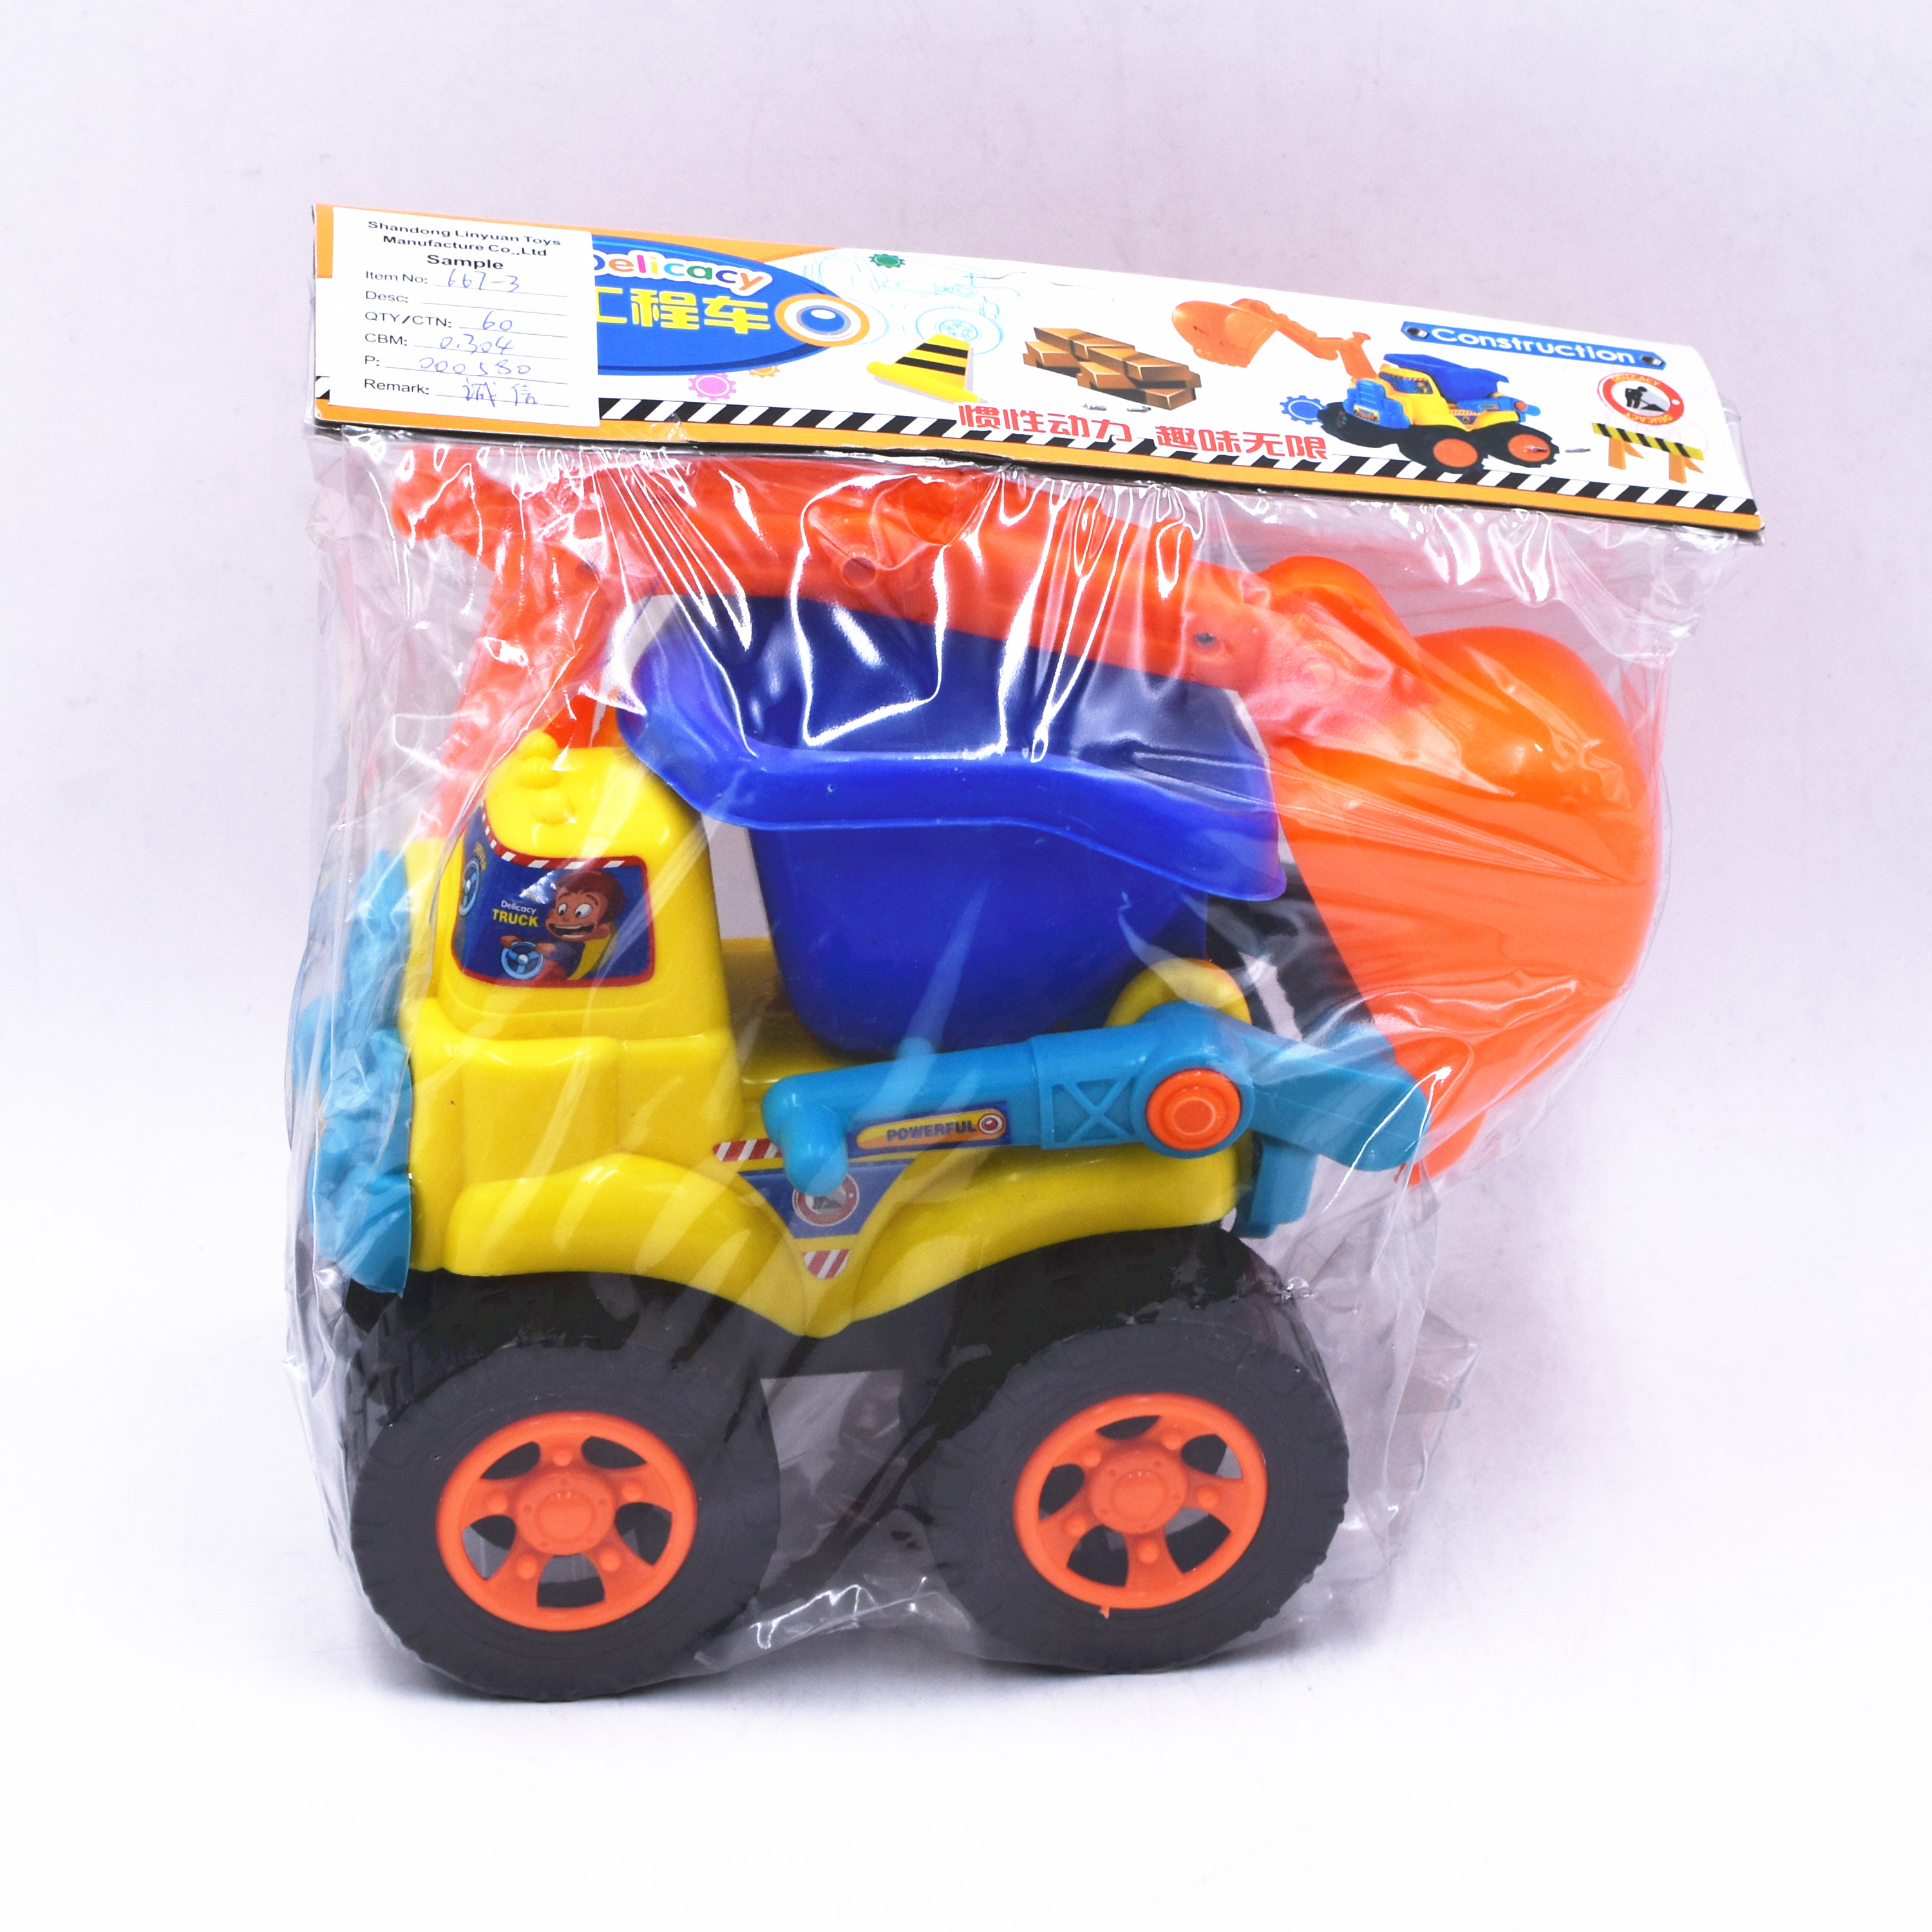 FREE WHEEL TRUCK TOY LY1703